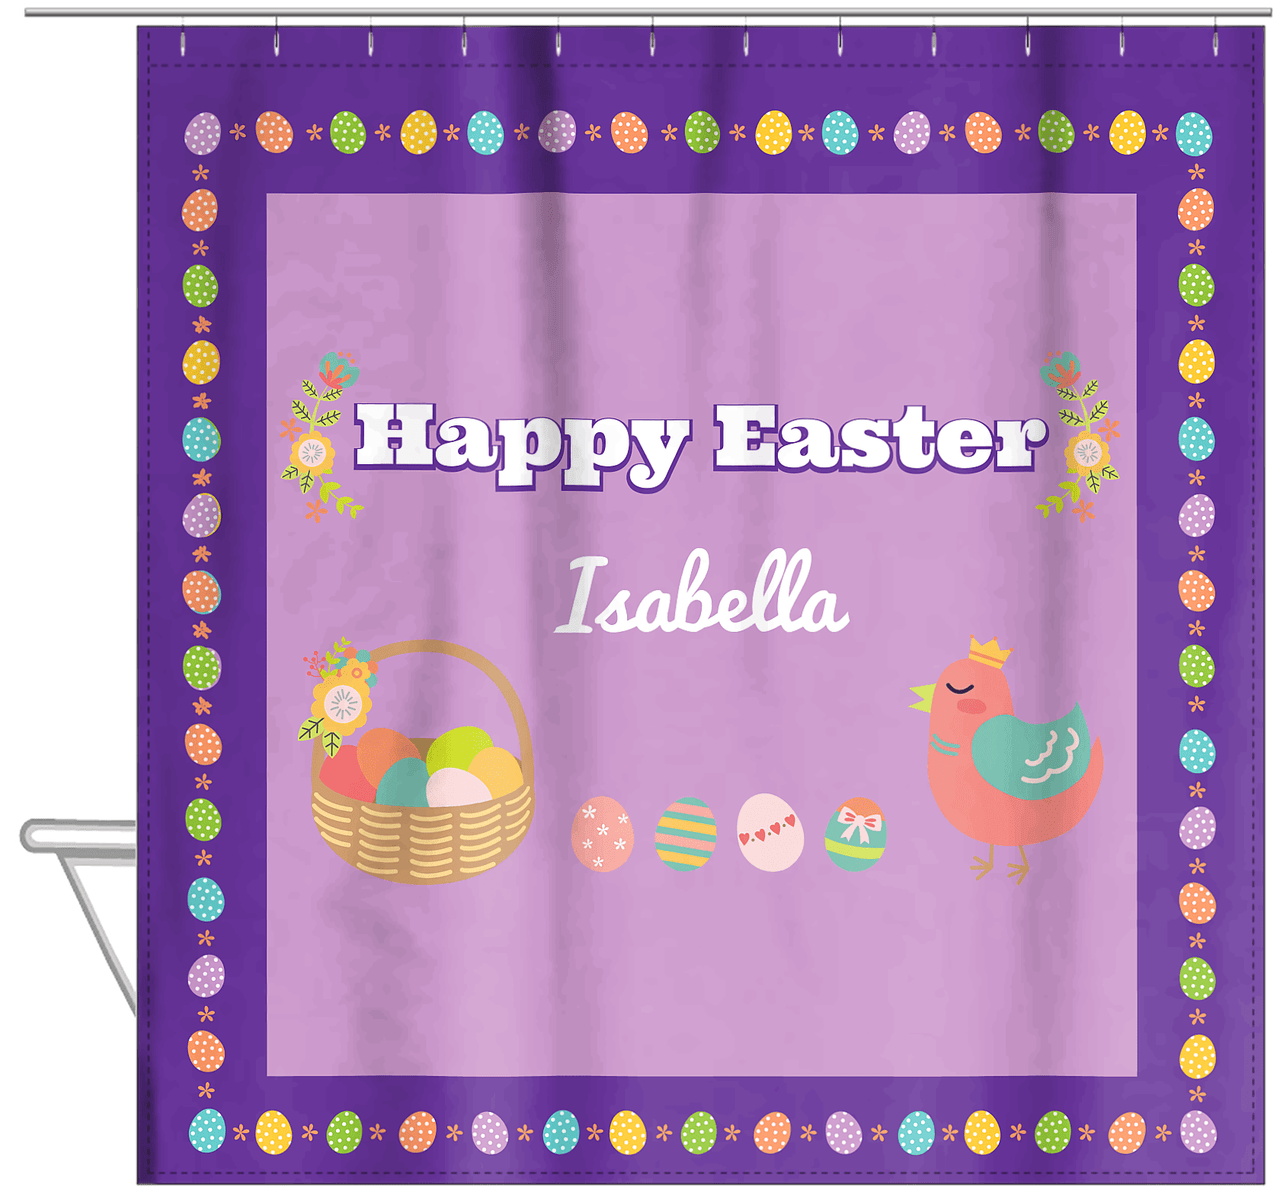 Personalized Easter Shower Curtain VII - Easter Eggs - Purple Background - Hanging View